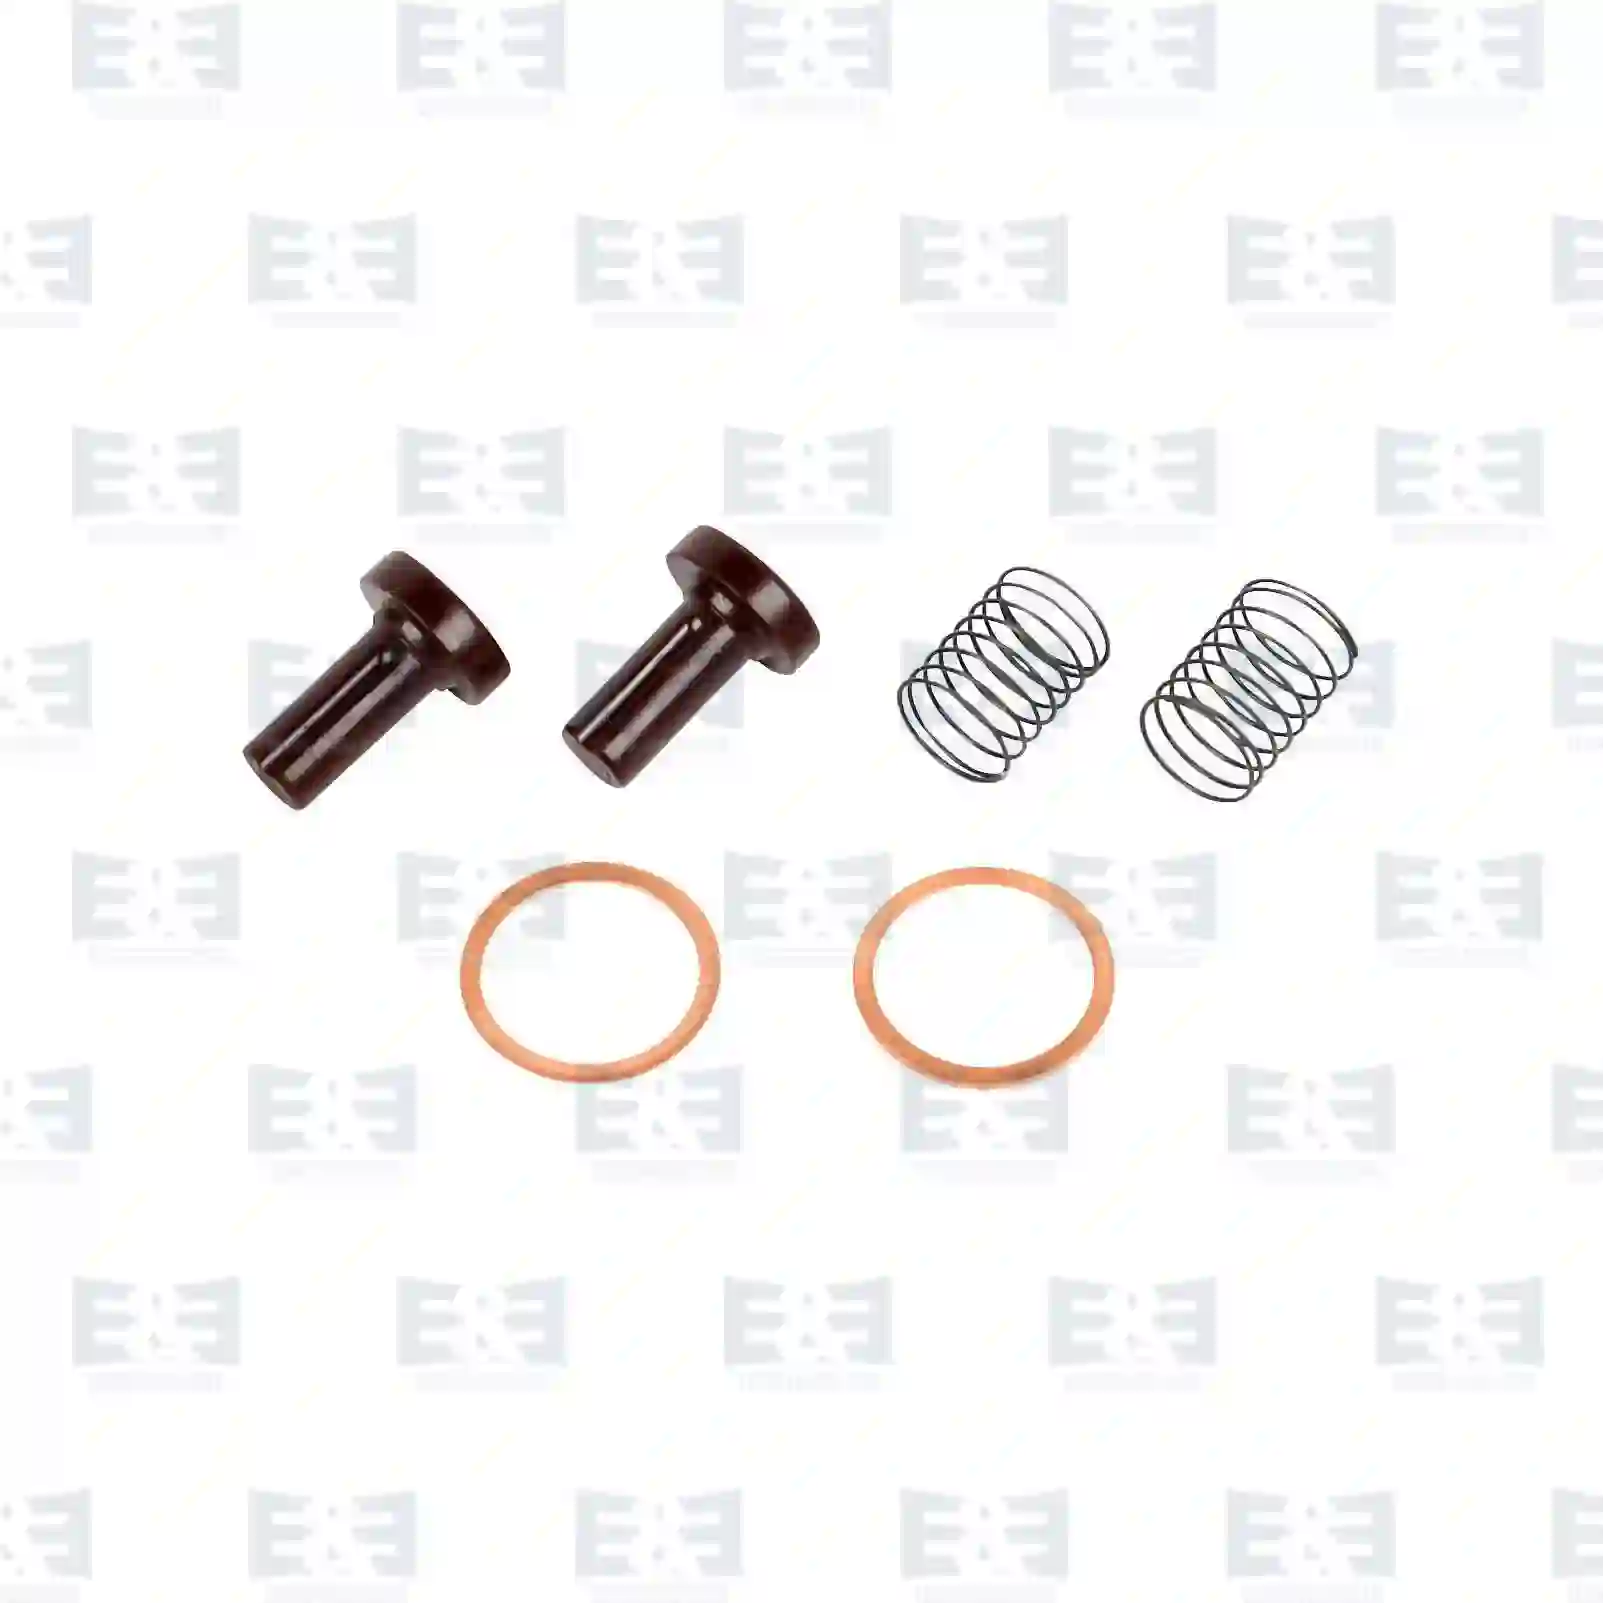  Repair kit, feed pump || E&E Truck Spare Parts | Truck Spare Parts, Auotomotive Spare Parts